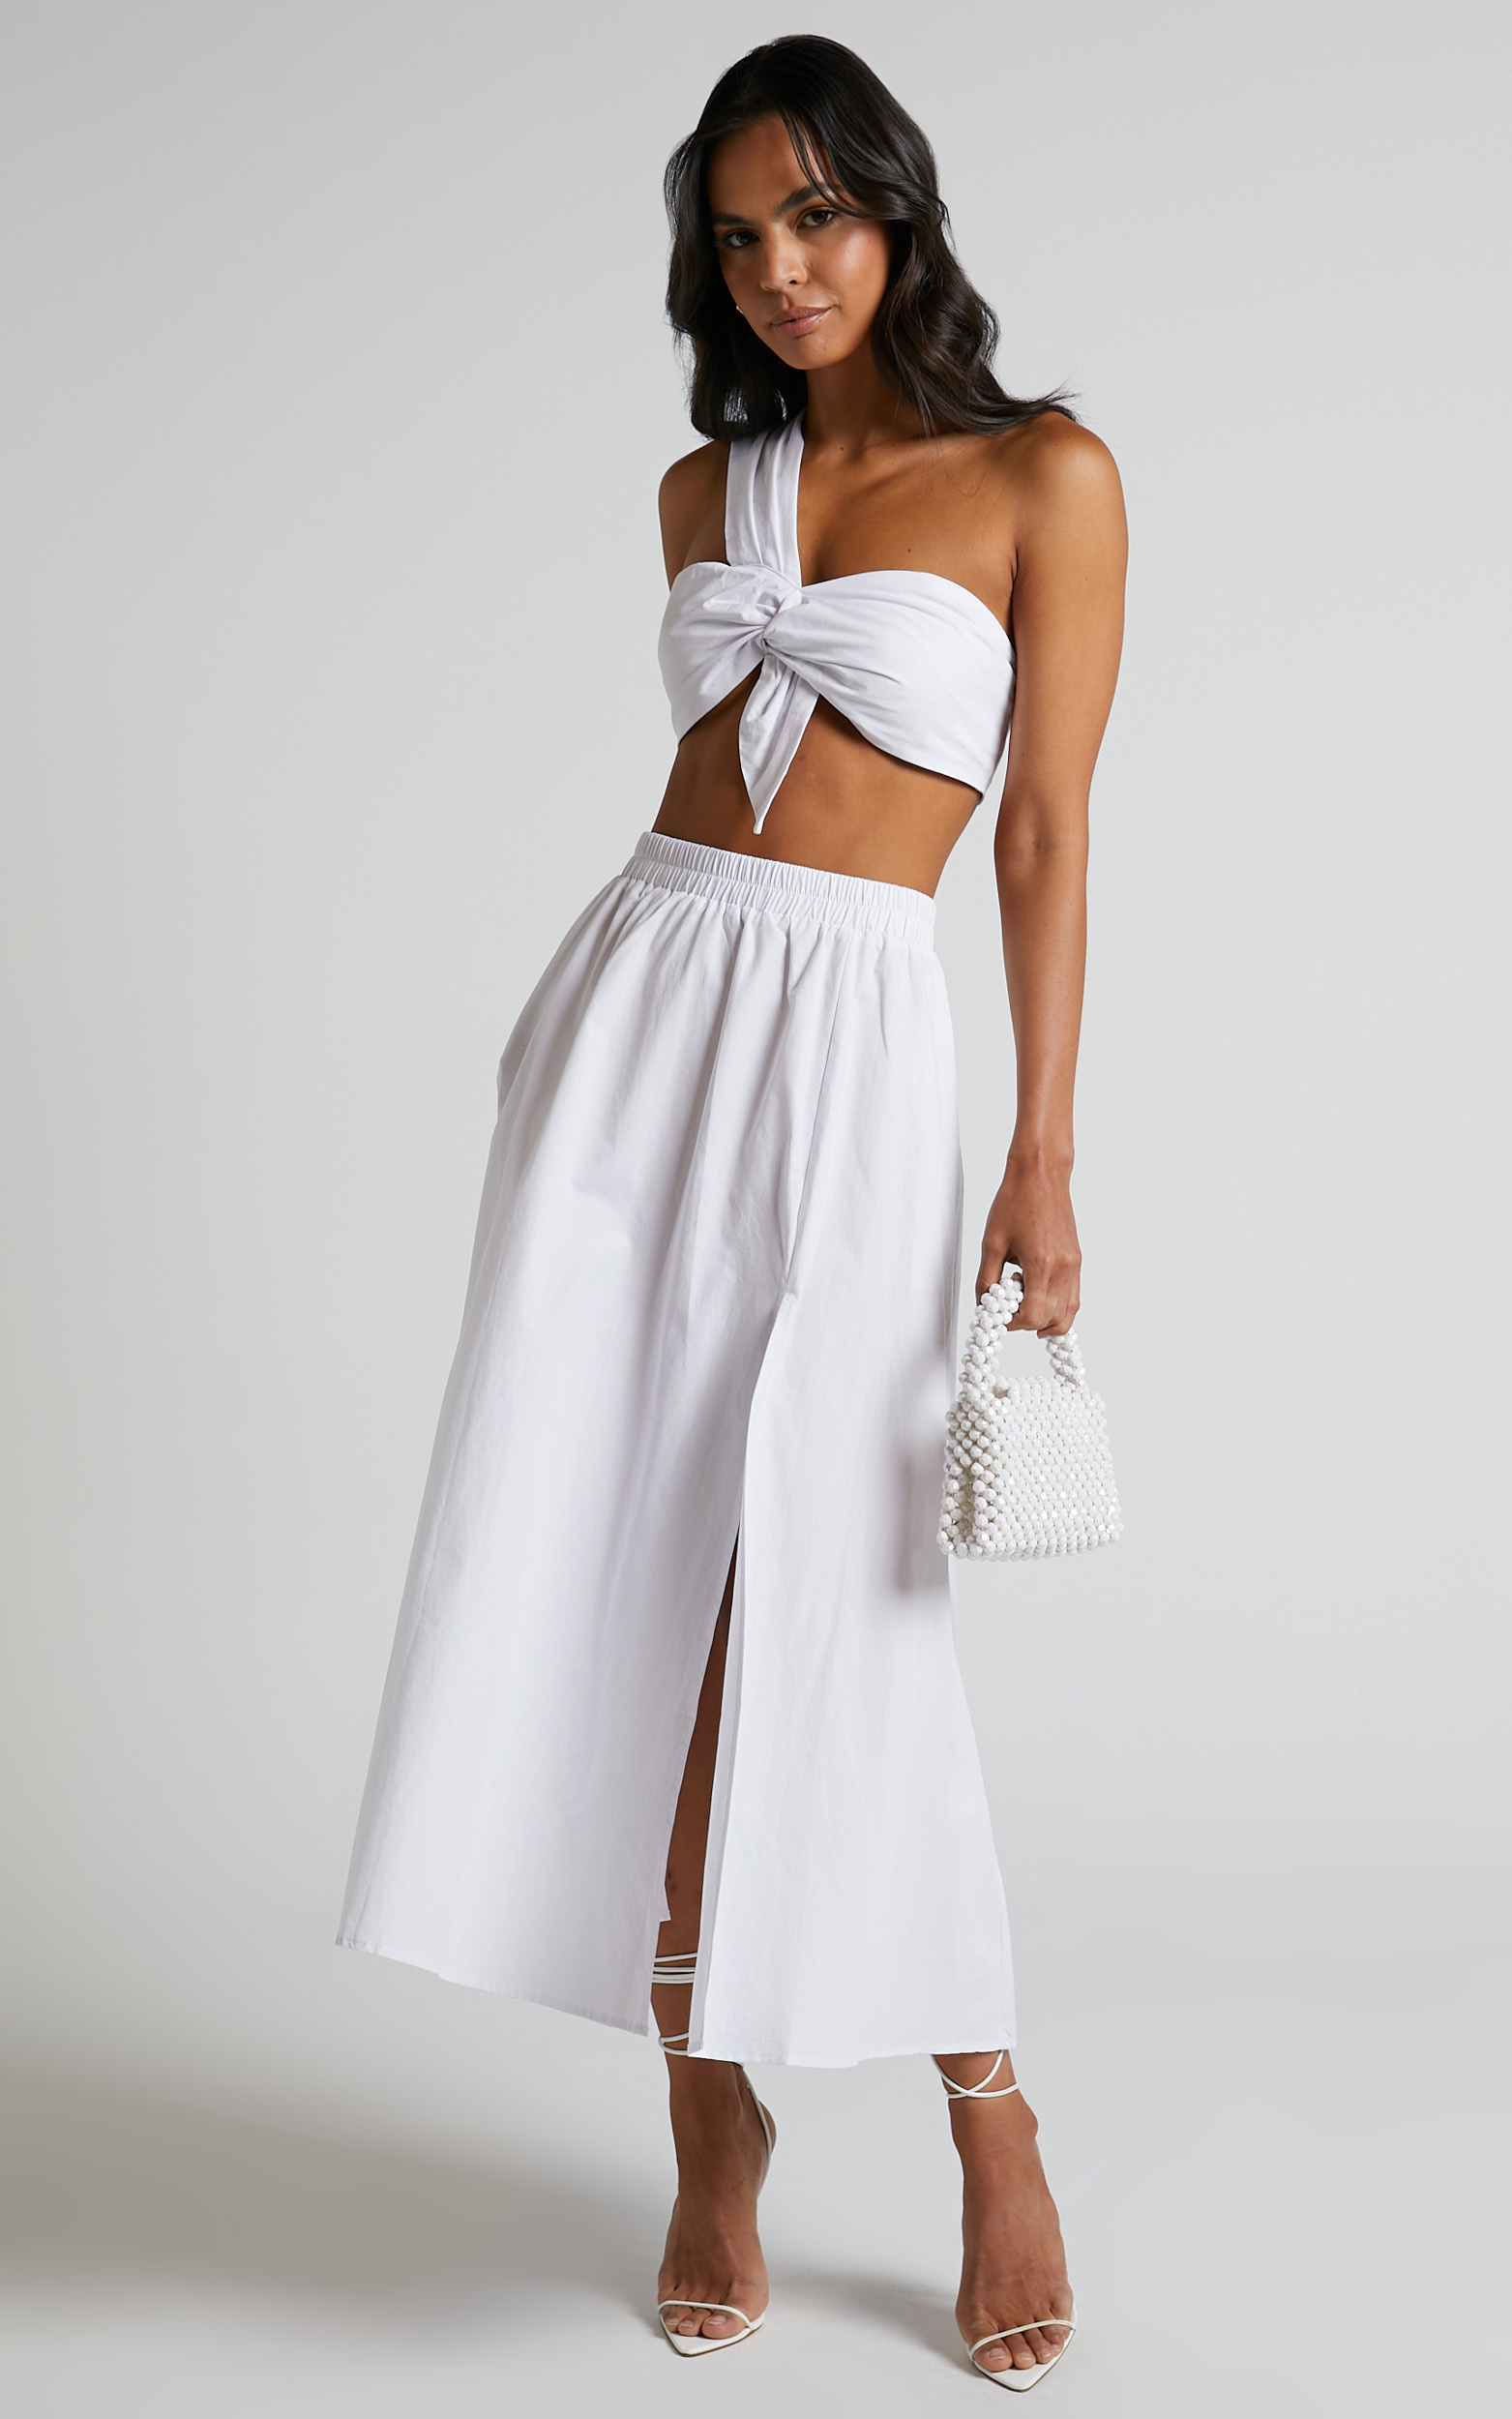 Sula Two Piece Set - One Shoulder Bralette Crop Top and Midi Skirt in ...